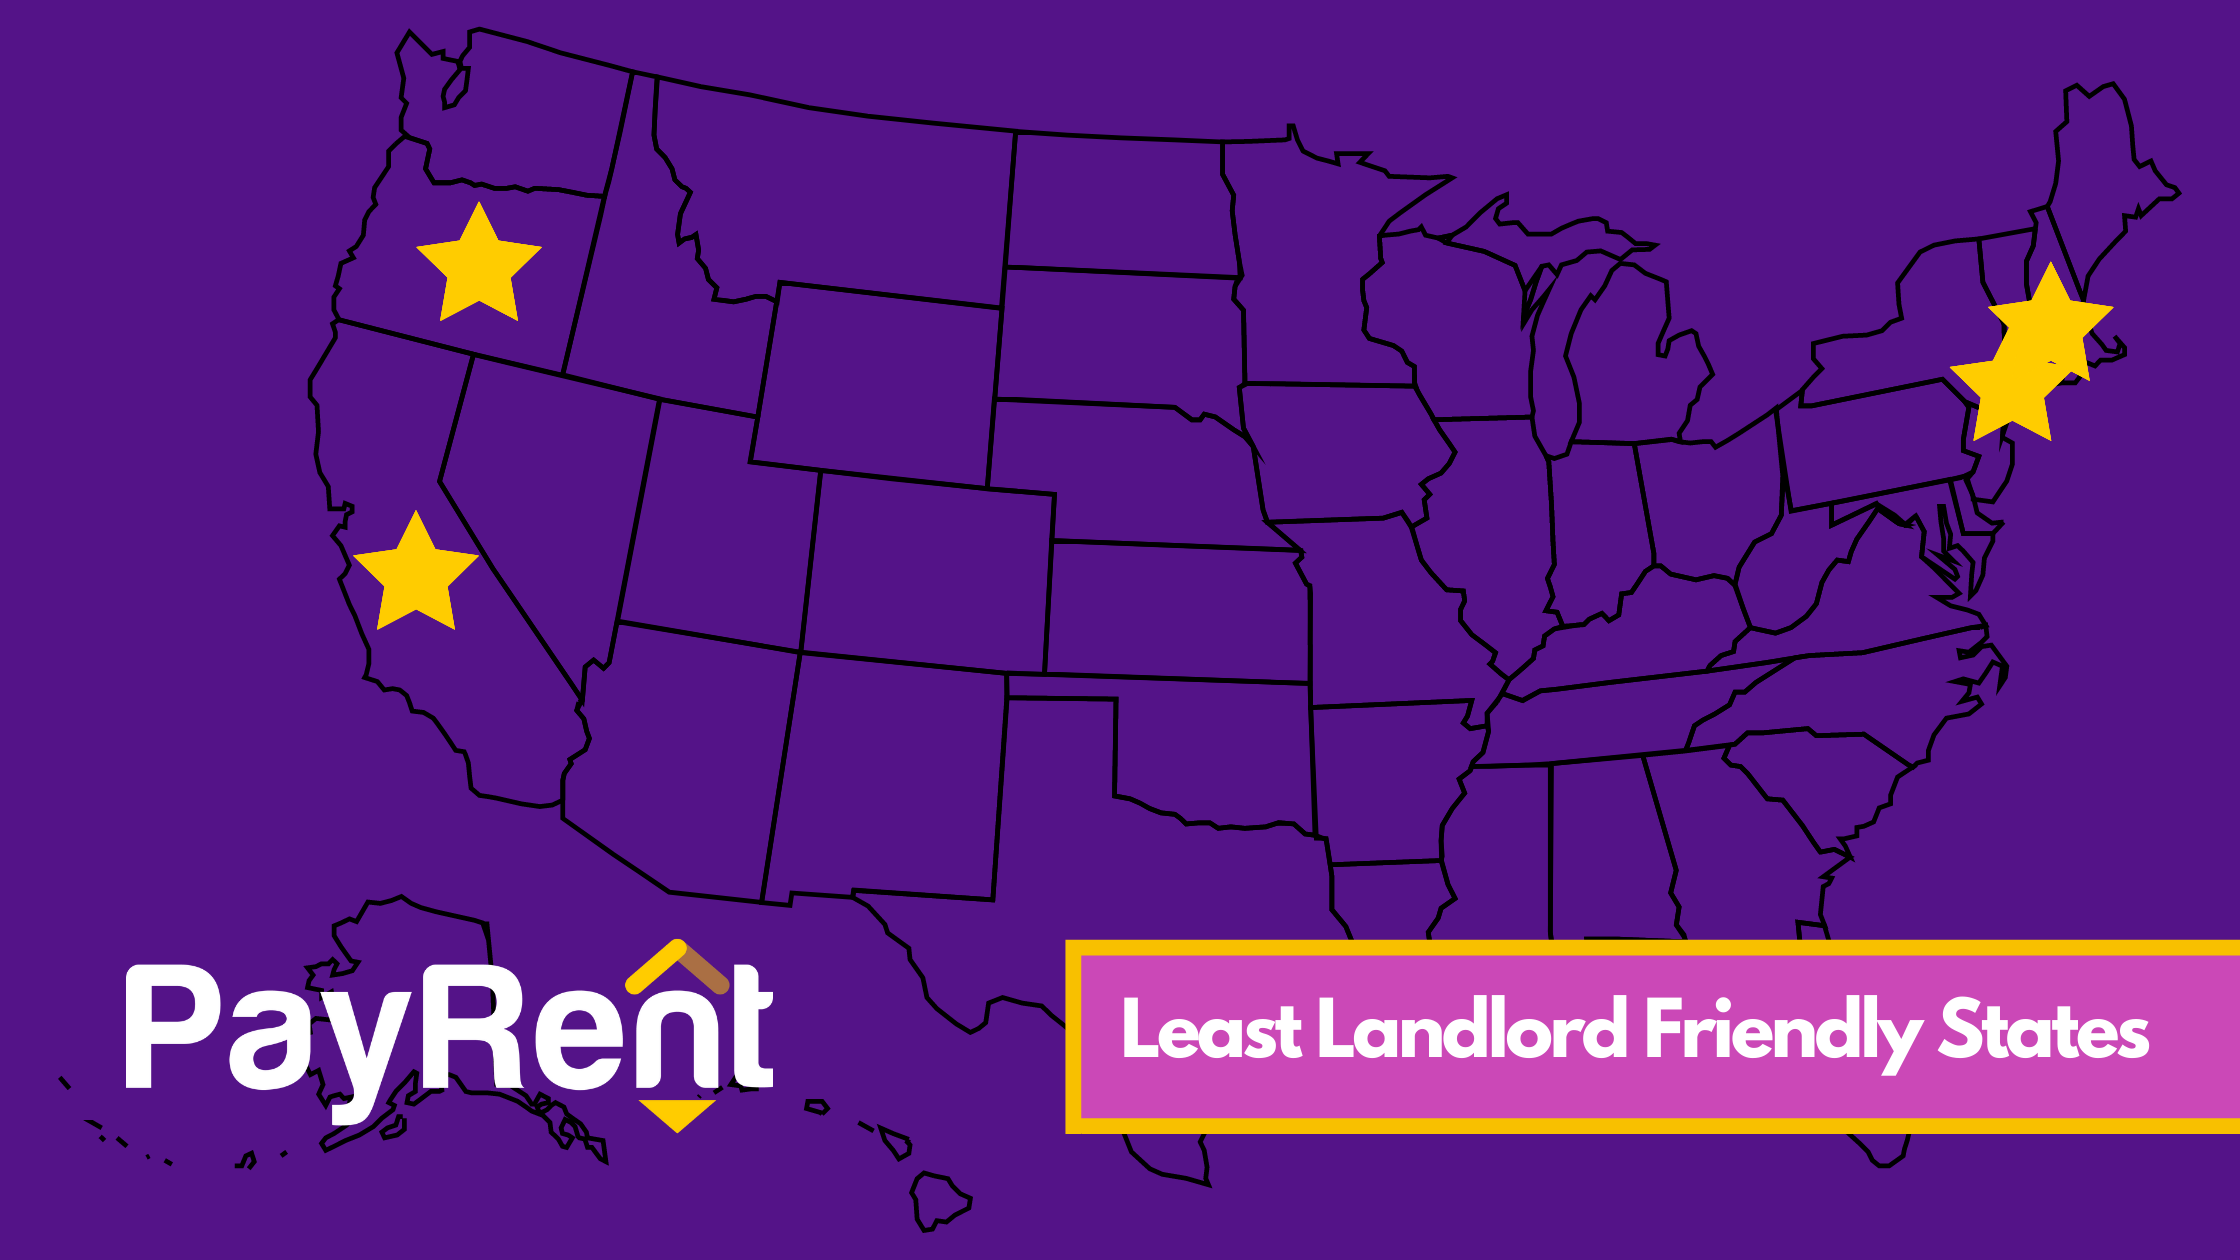 Least Landlord Friendly States